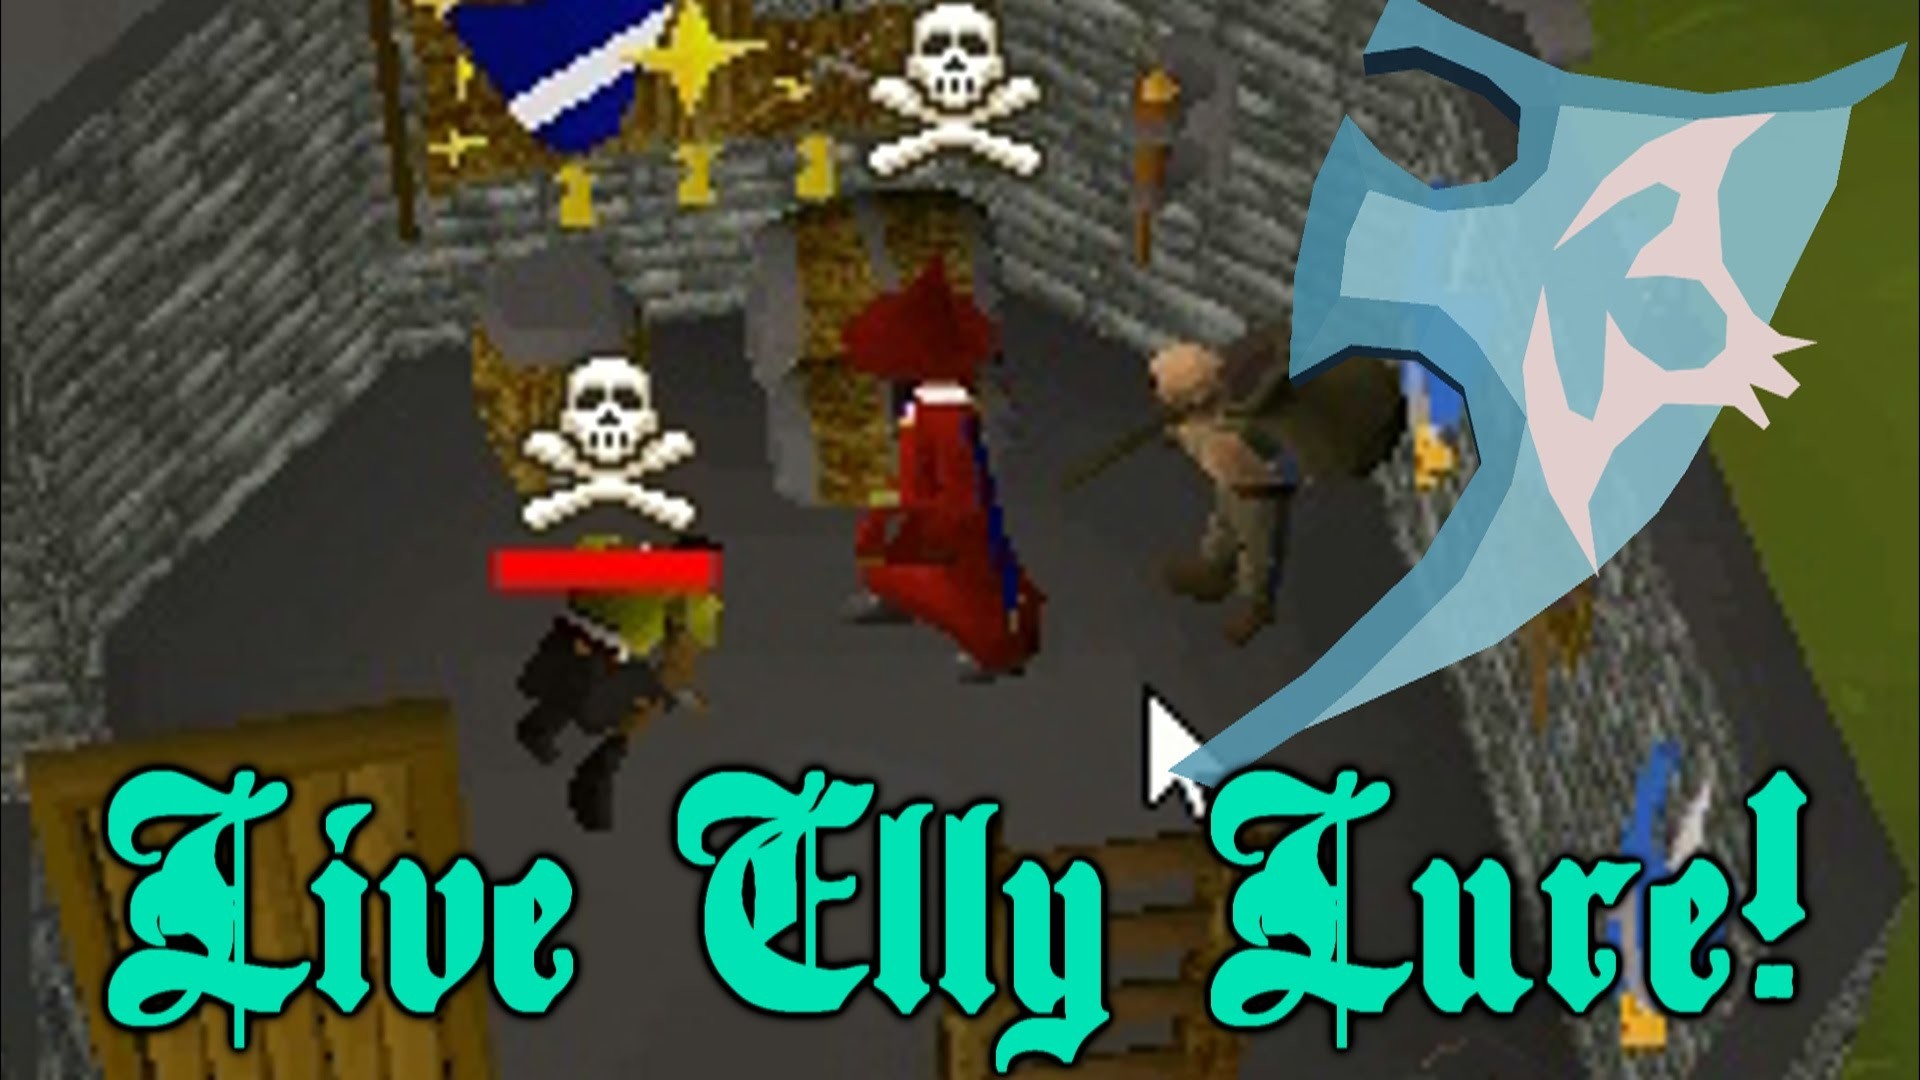 1920x1080 Live Luring a Kid for his Elly and Cash (OSRS) OLDSCHOOL RUNESCAPE LURING  VID 2016